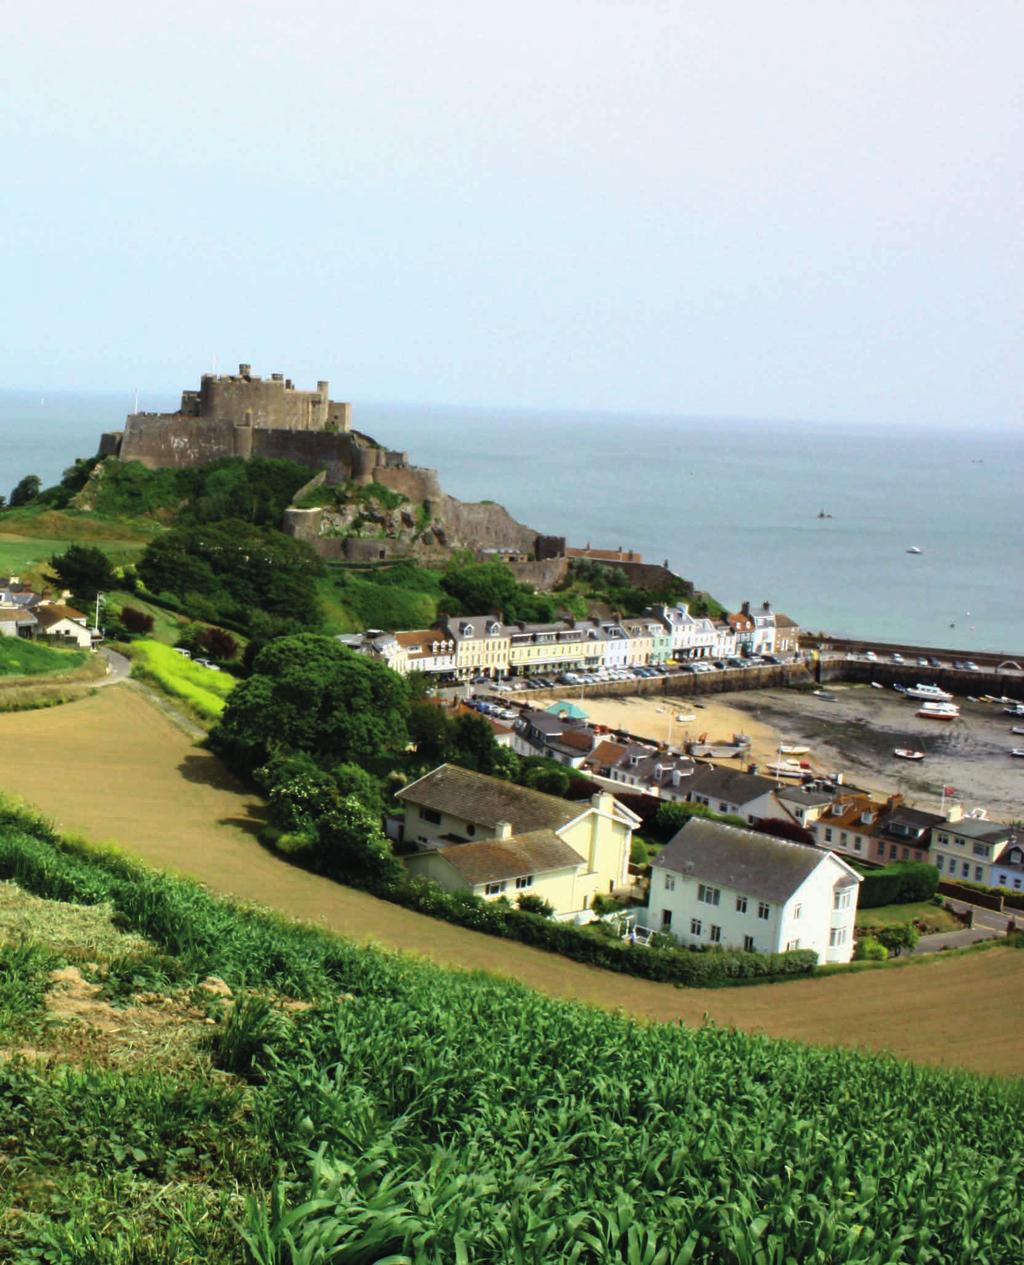 Education & Leisure During a visit to Jersey, entrance fees or tickets for various local attractions can be organized by the JAAC team to: Durrell Wildlife Park Jersey Museum Jersey Maritime Museum